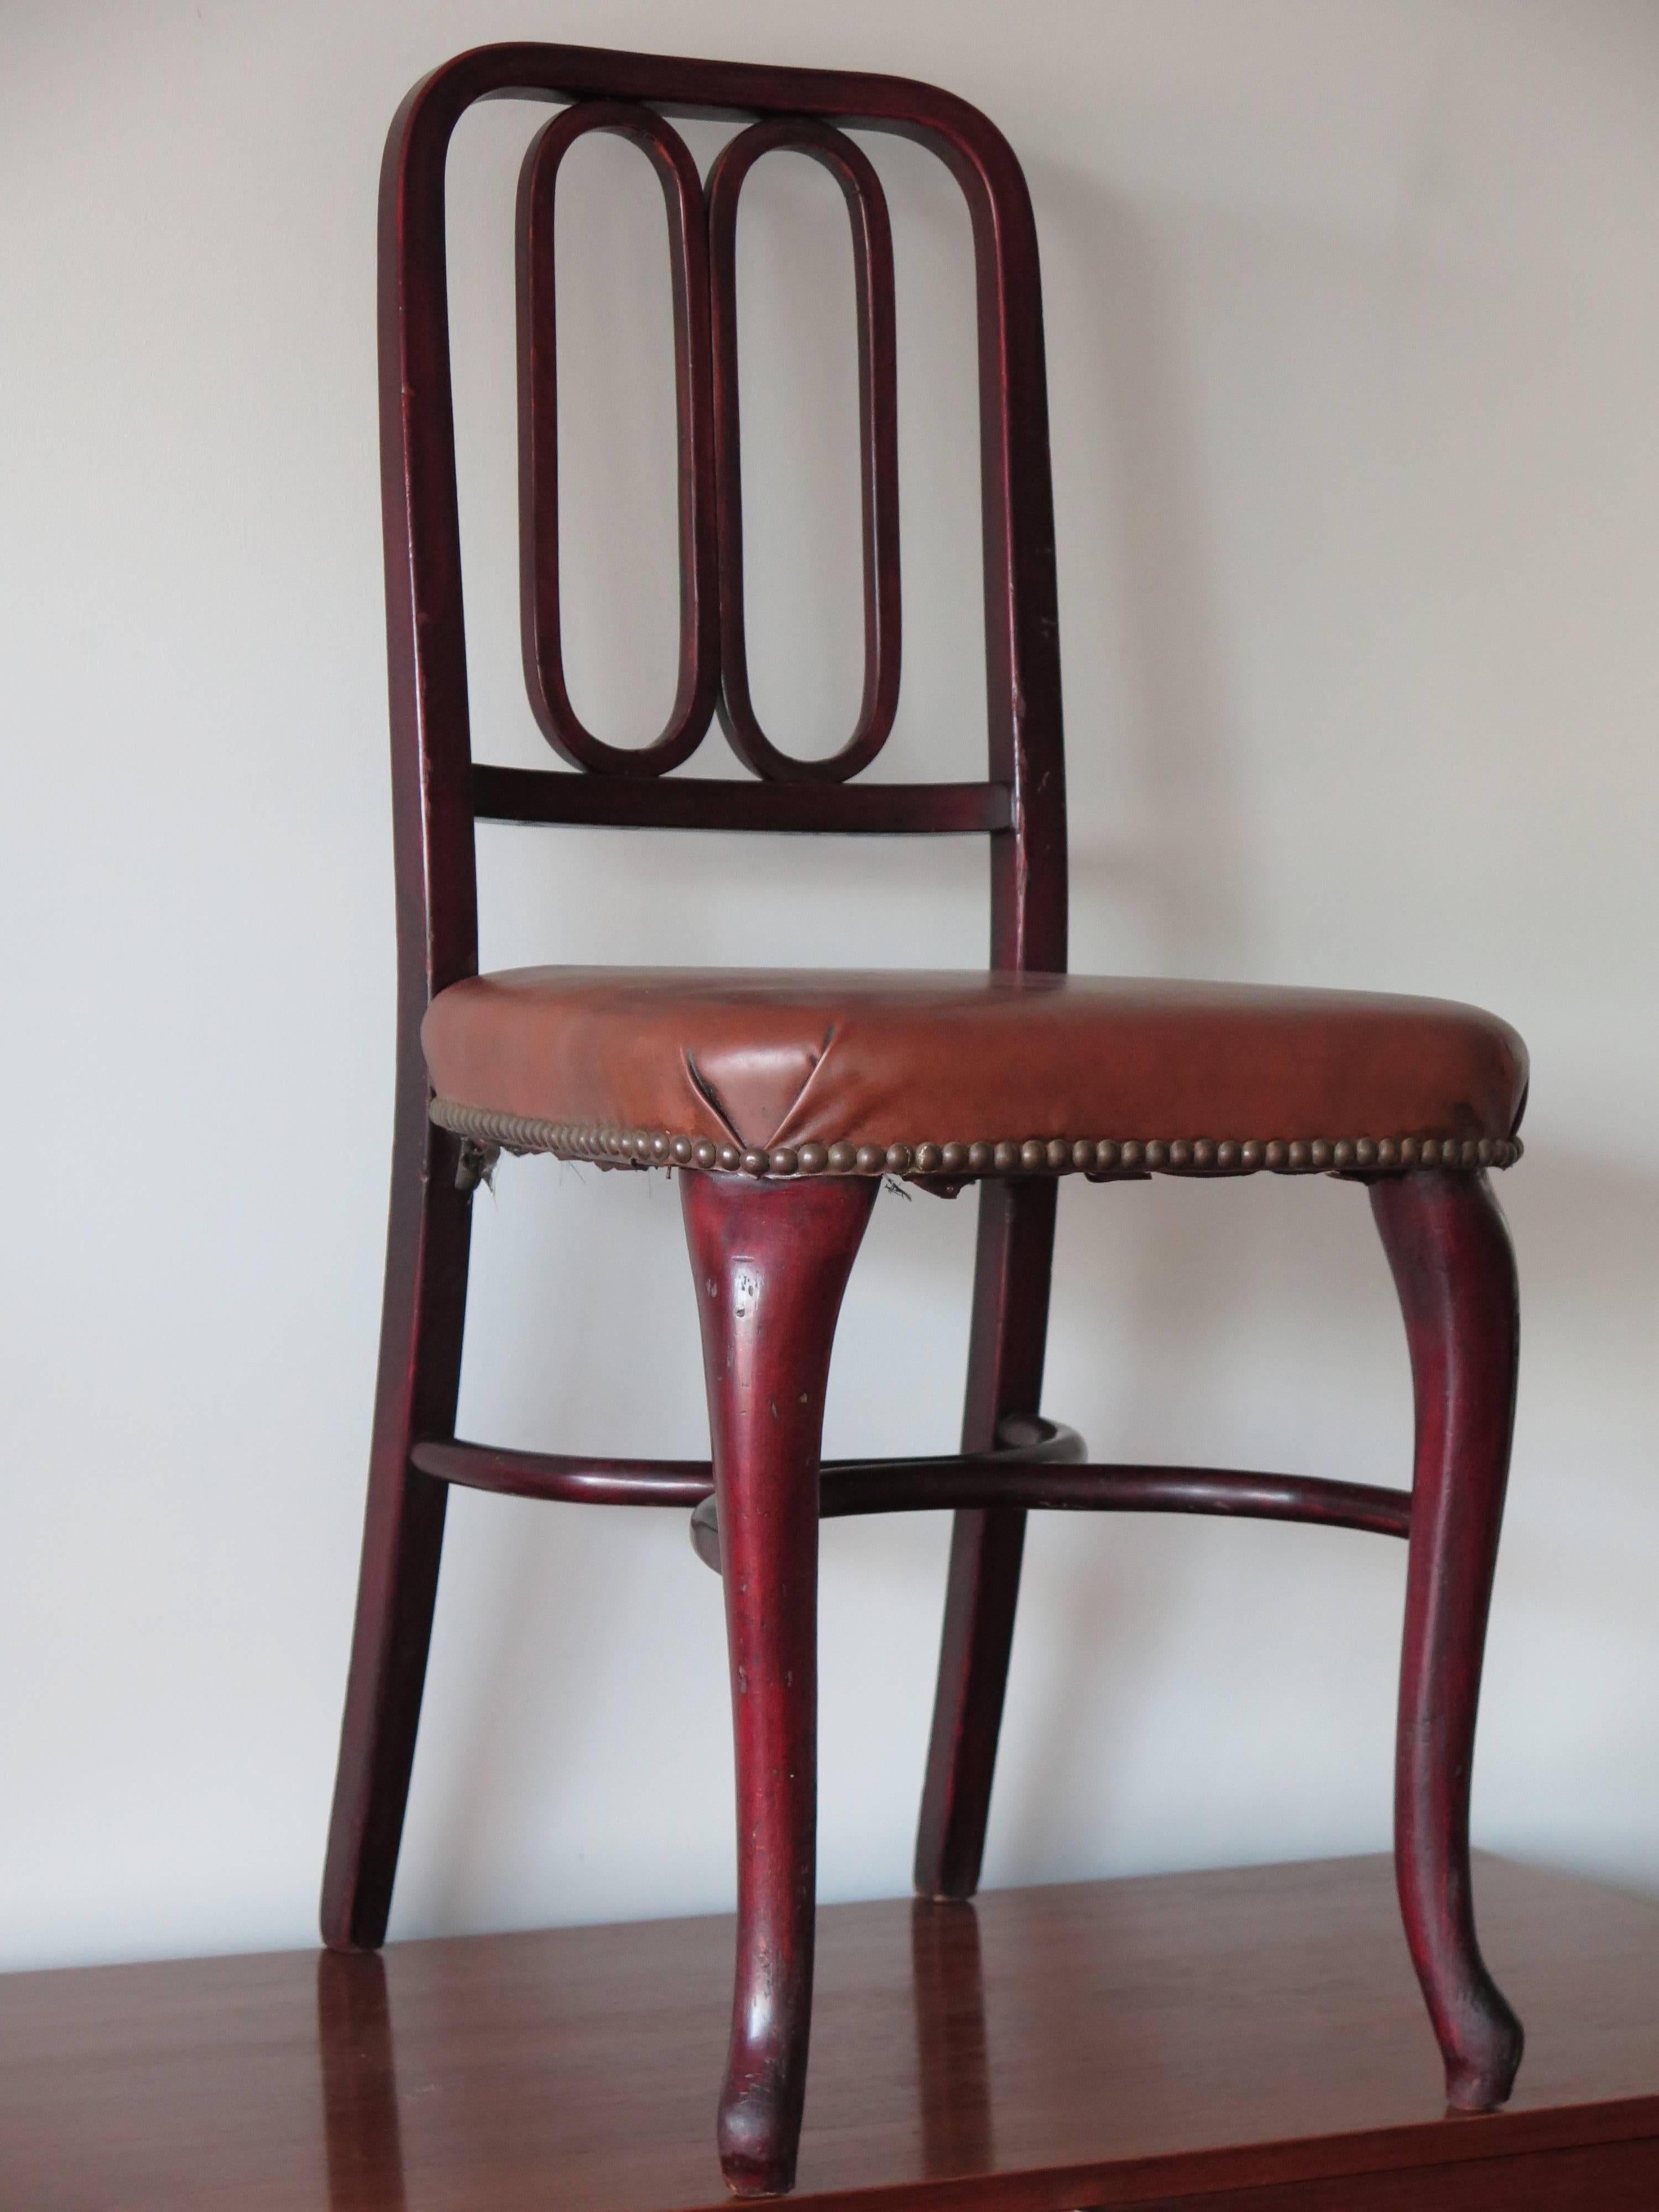 A rare, Thonet bentwood chair with original labels and upholstery. Made in Vienna, Austria and sold in NYC.